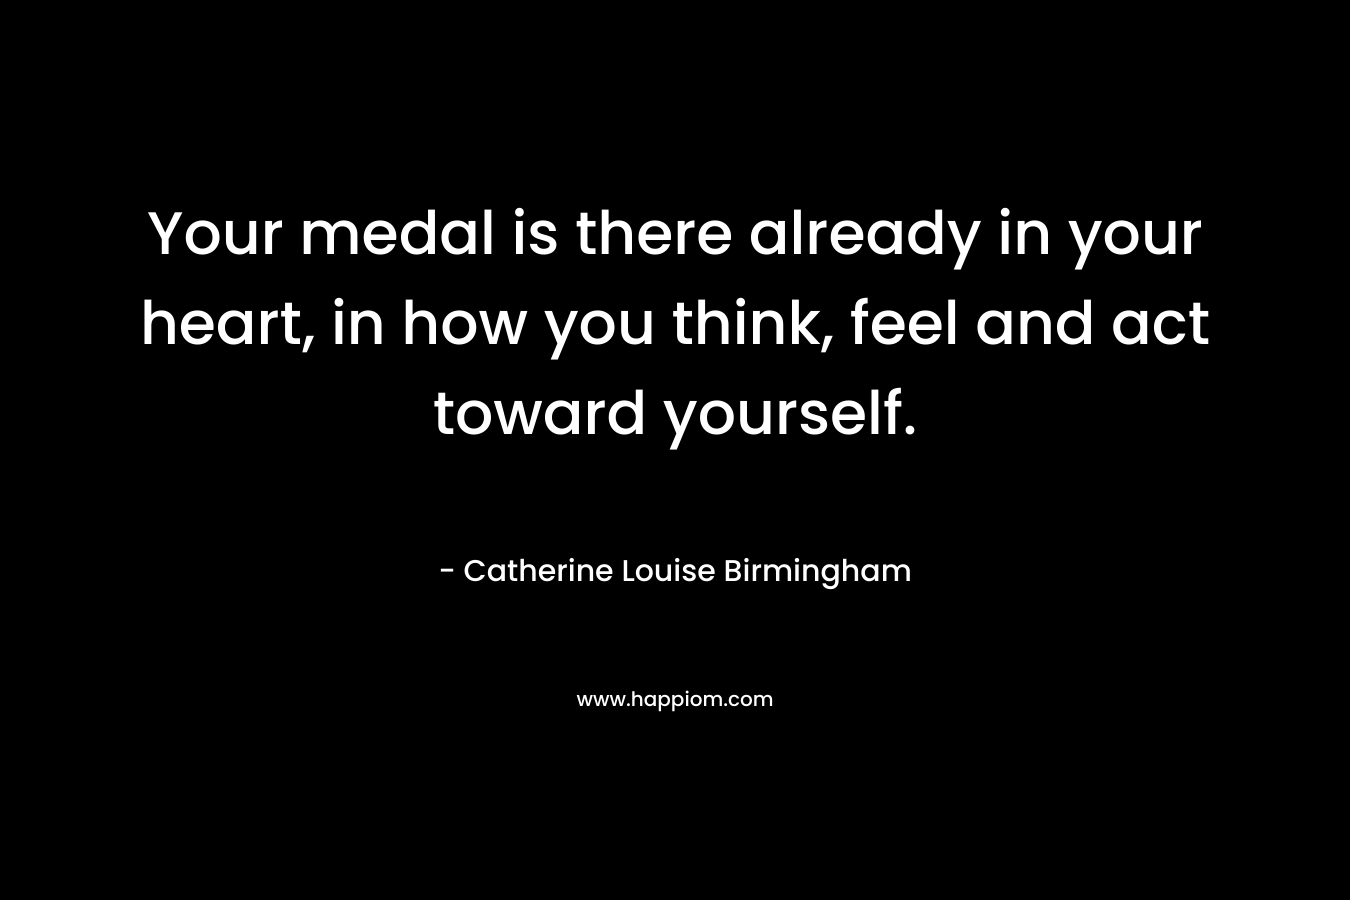 Your medal is there already in your heart, in how you think, feel and act toward yourself.